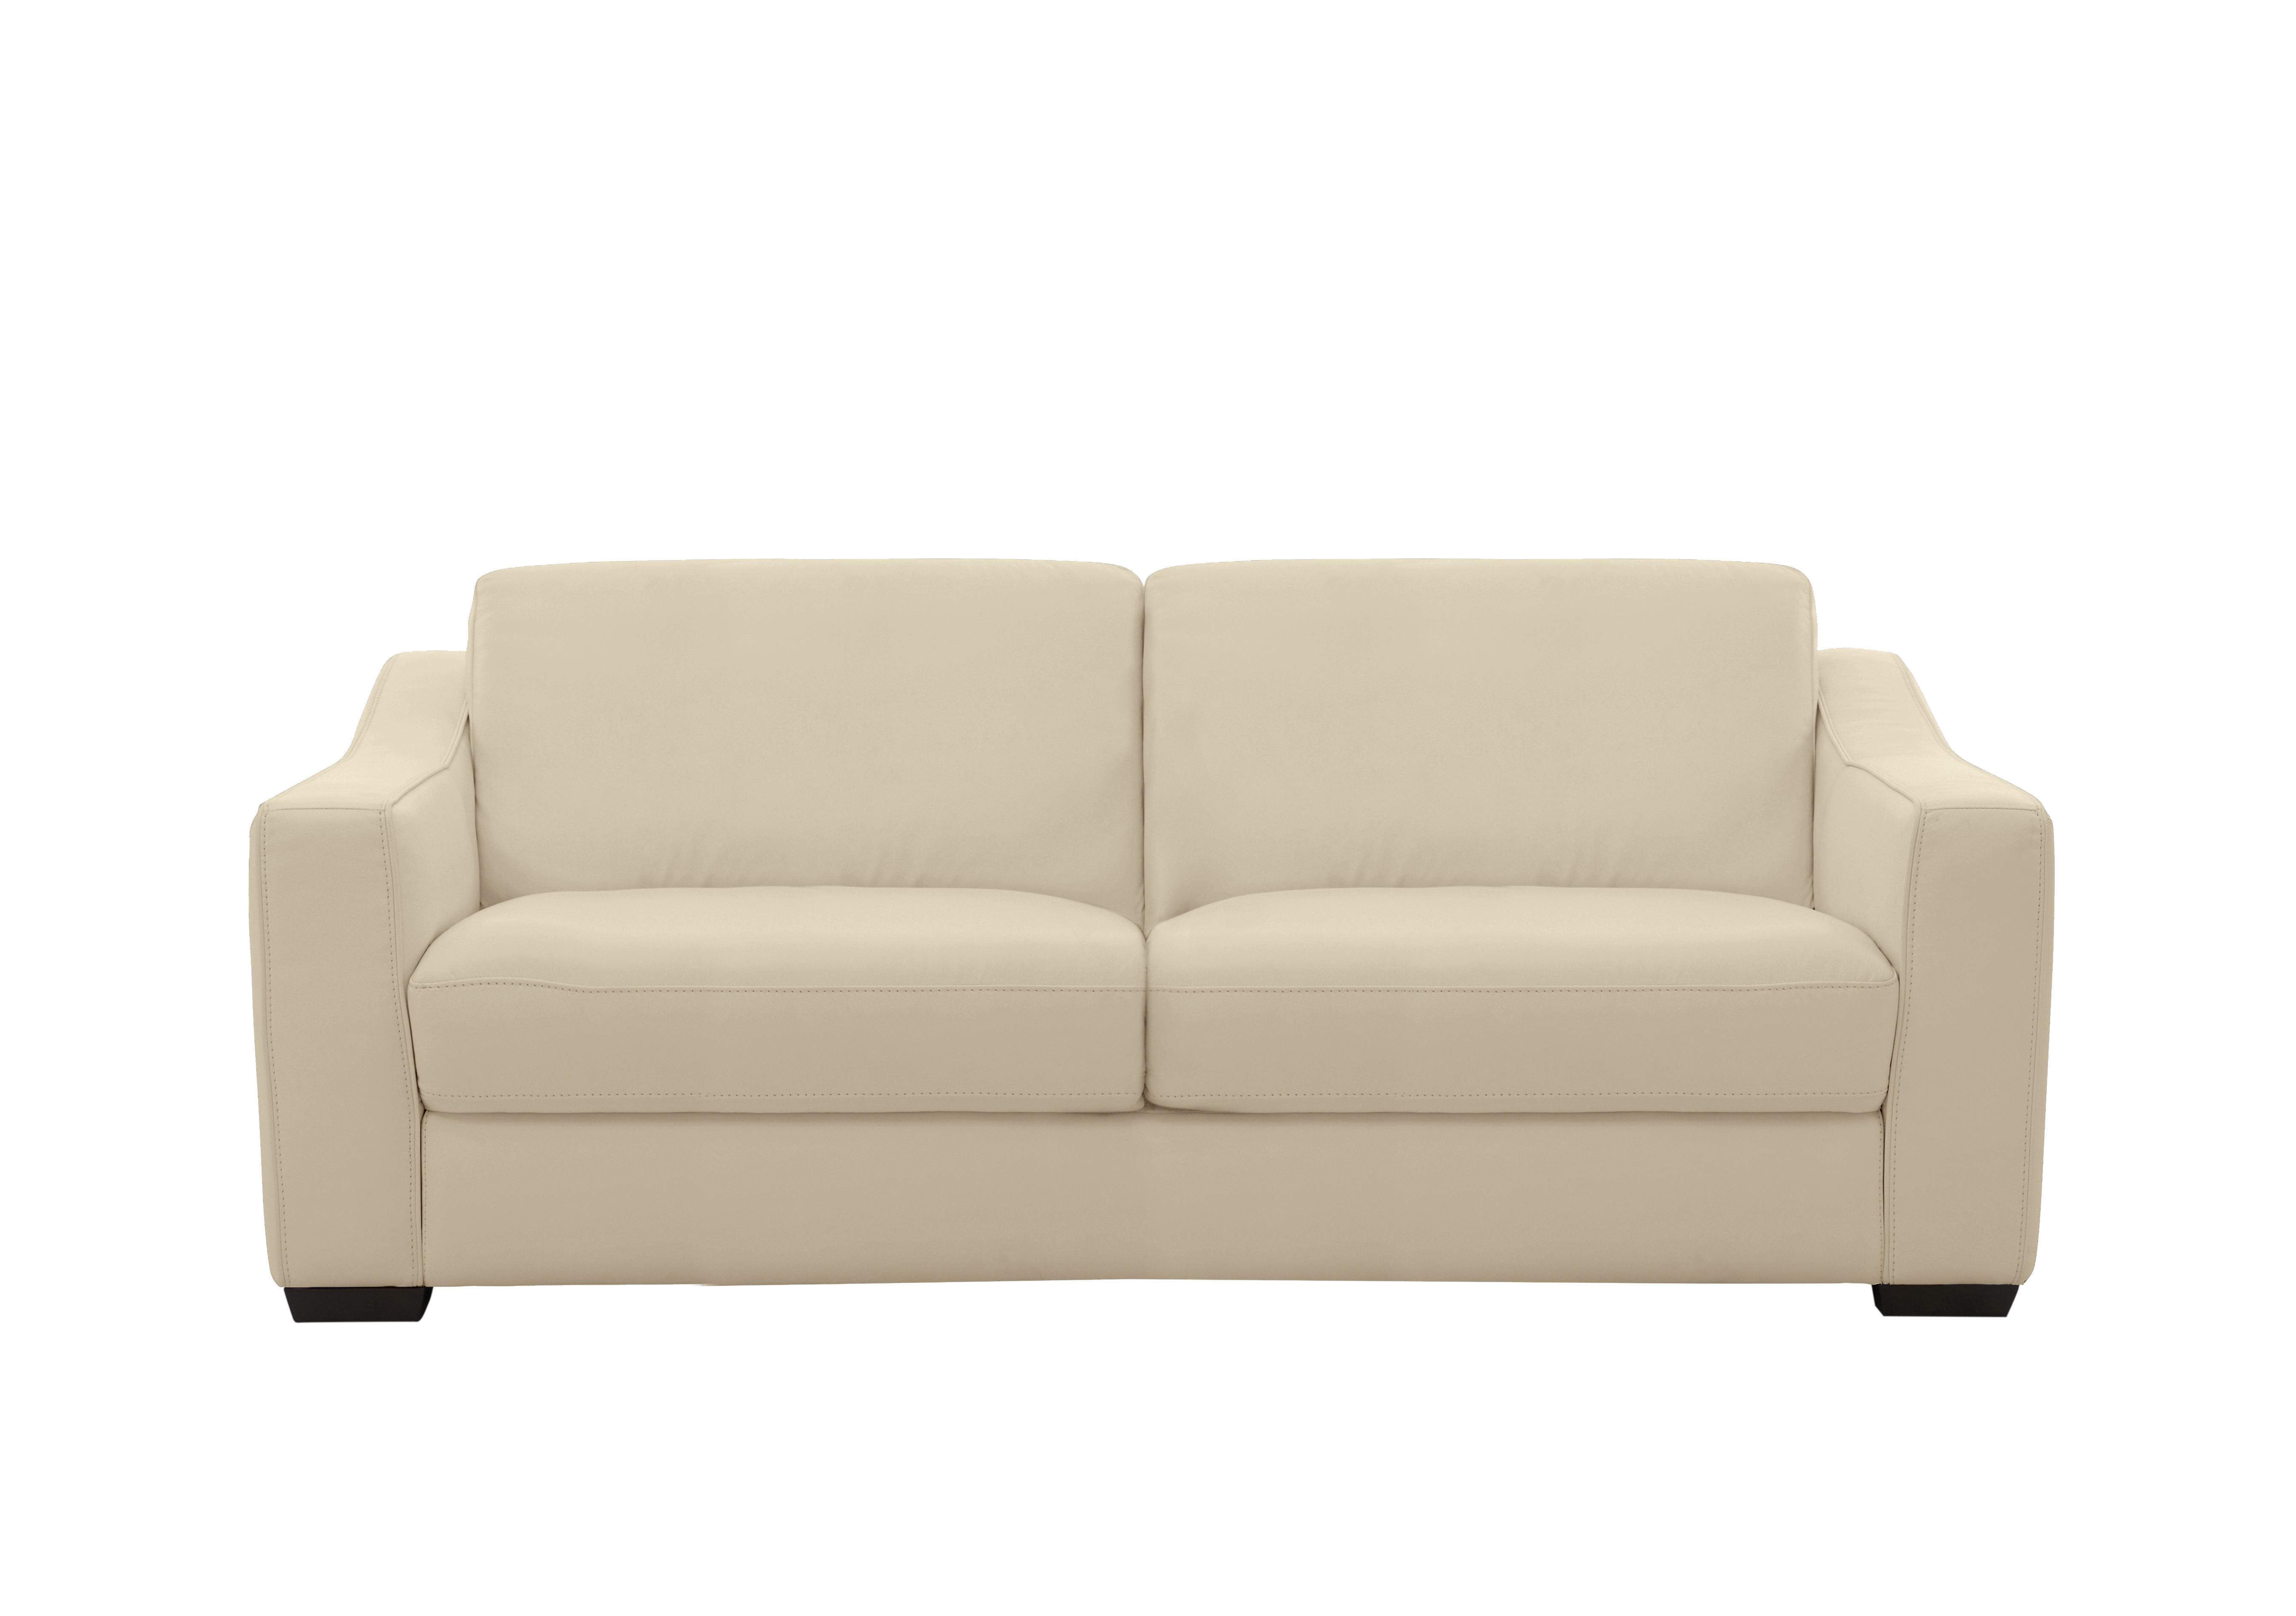 Optimus Space Saving Leather Sofa Bed with Memory Foam Mattress in Bv-862c Bisque on Furniture Village